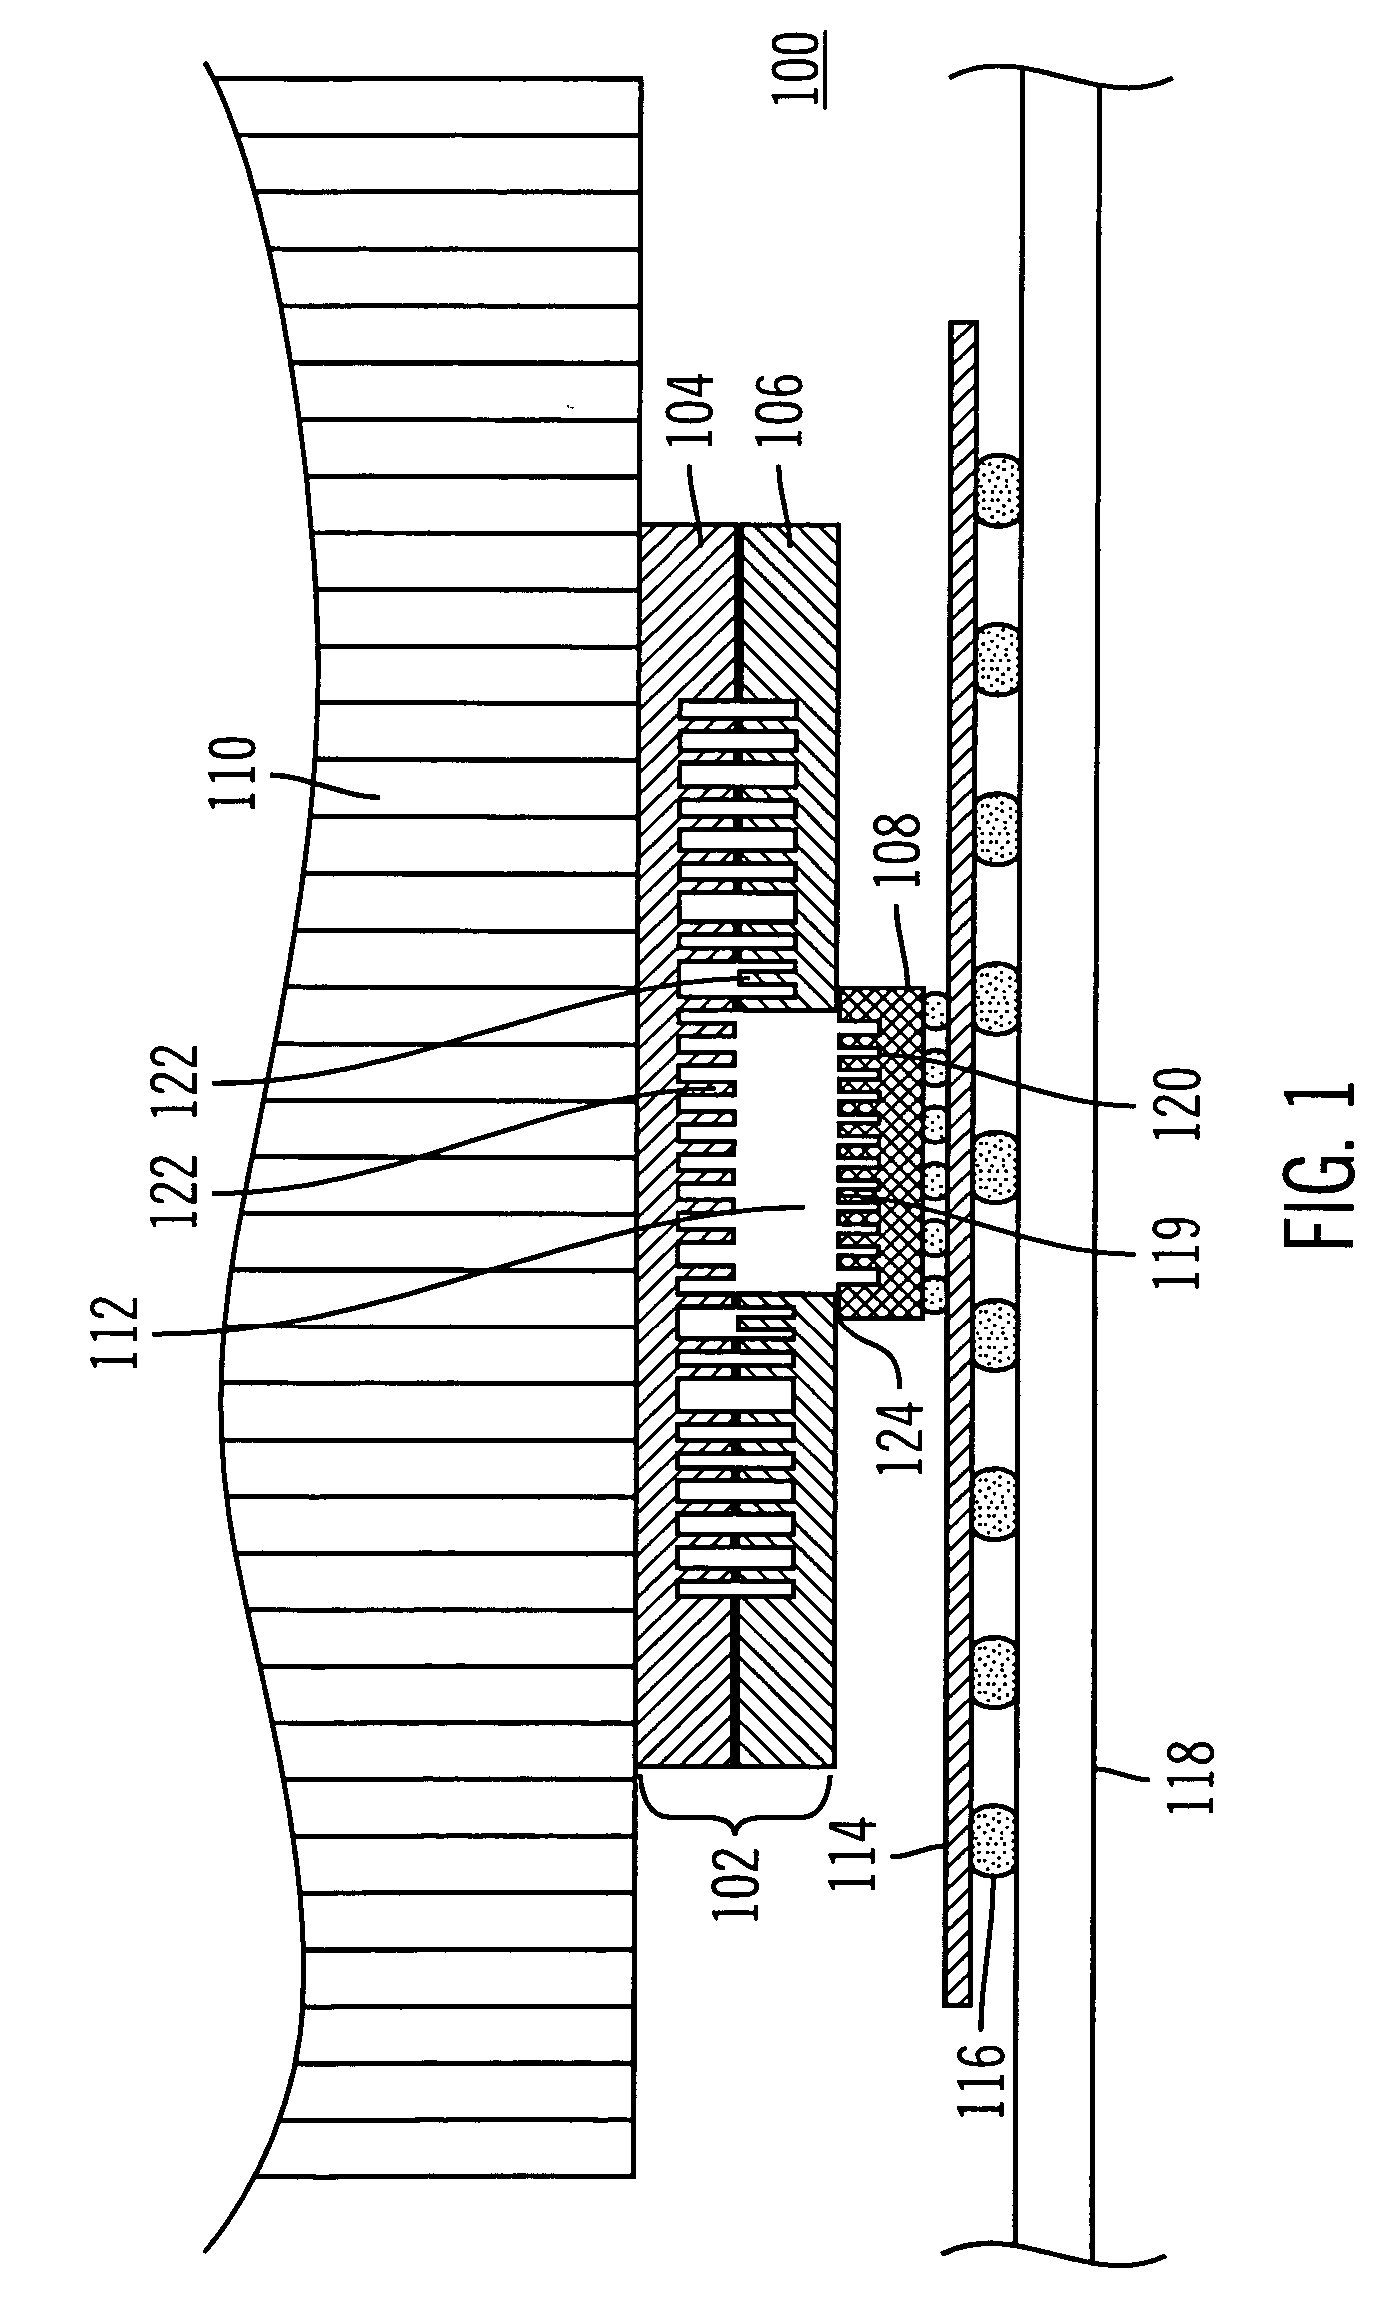 Thermal interposer for thermal management of semiconductor devices